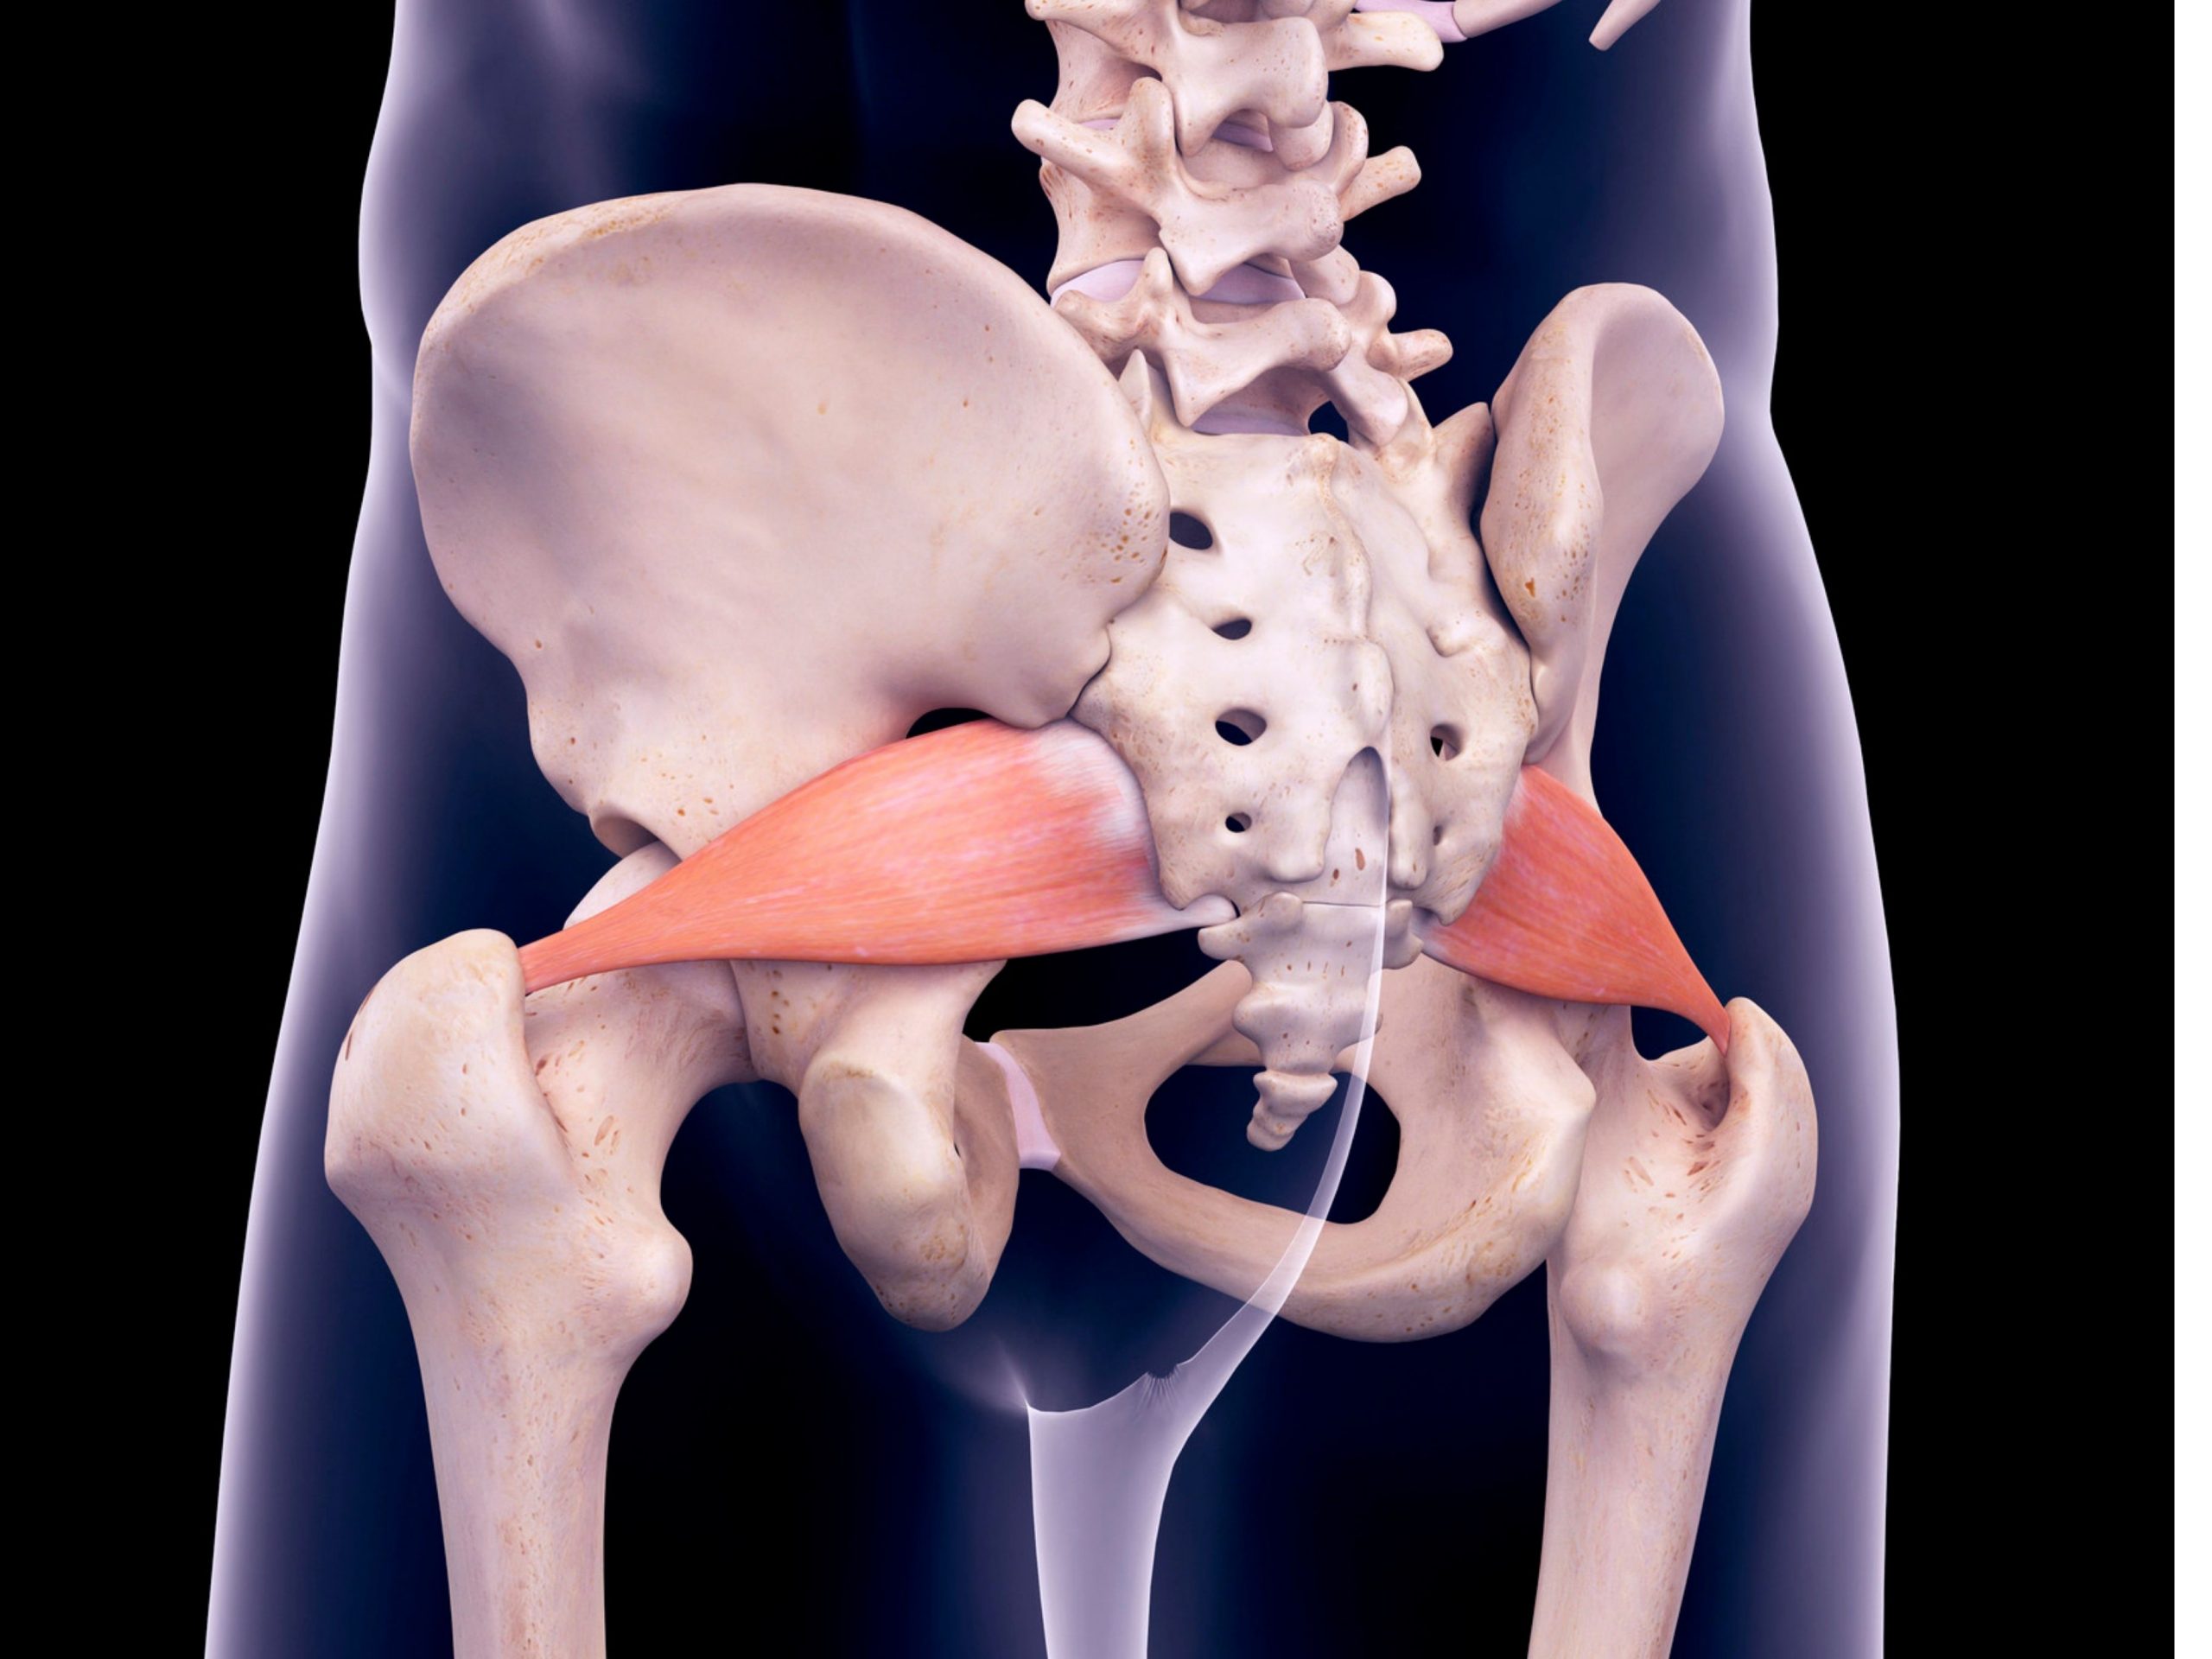 https://pereaclinic.com/wp-content/uploads/2021/08/Piriformis-syndrome-scaled.jpg